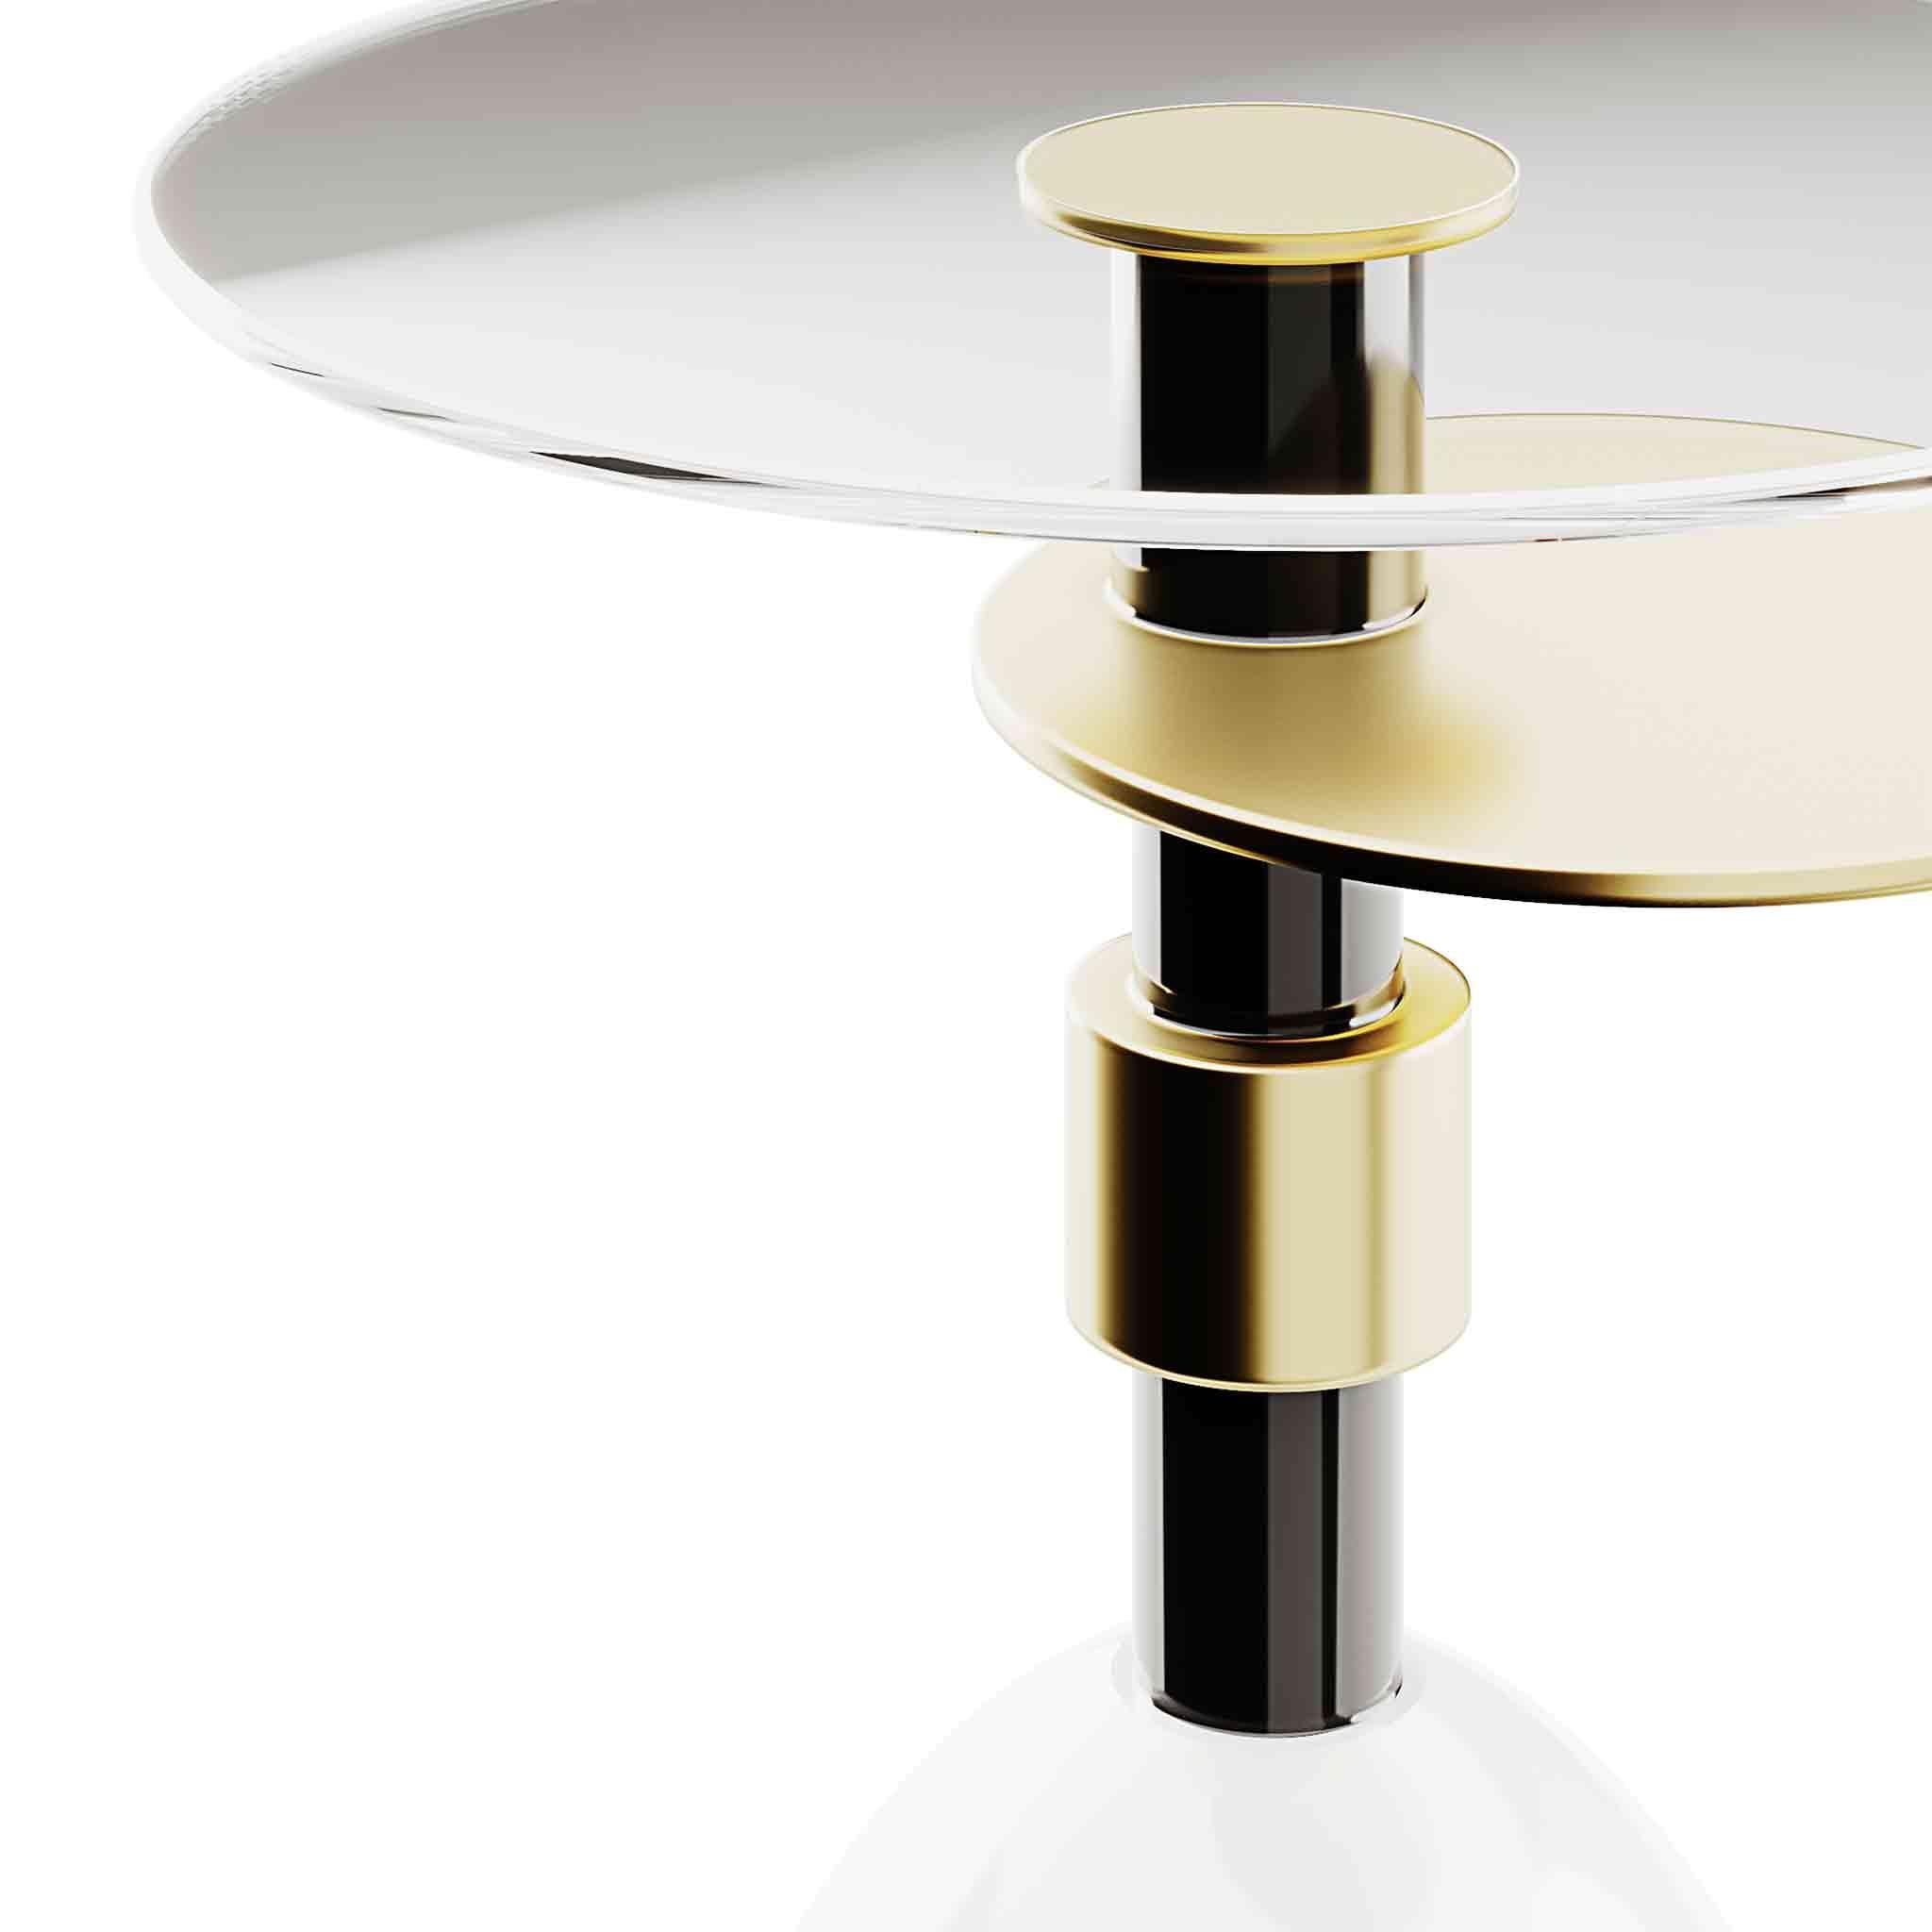 Wood Contemporary Minimal Black, White & Gold Round Side Table Set With Glass Top For Sale